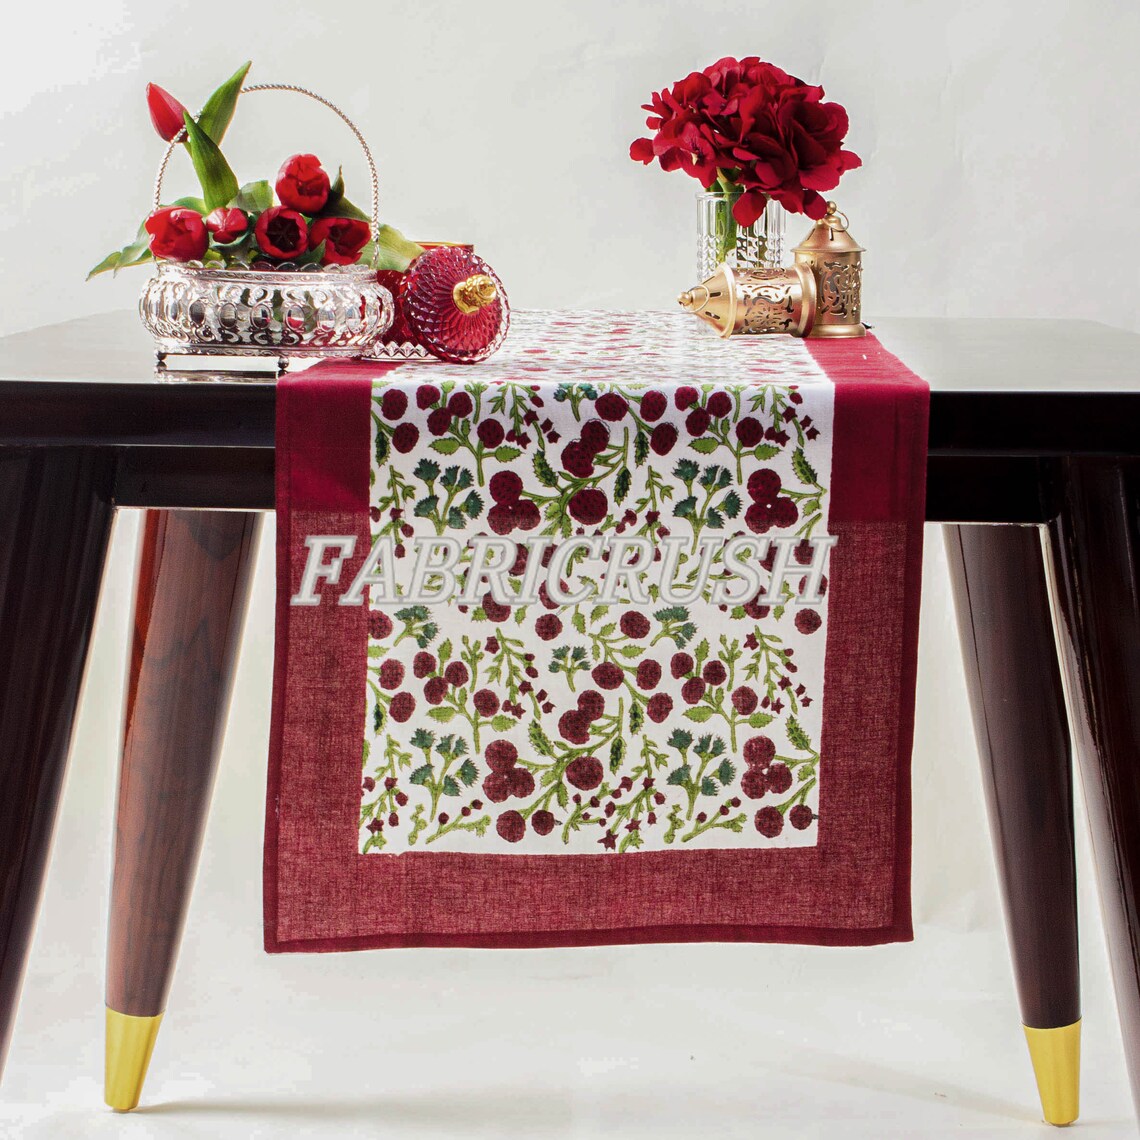 Fabricrush Garnet Red, Emerald and Olive Green Indian Hand Block Cherry Printed Cotton Cloth Table Runner Wedding Events Home Decor Party Birthday Gift